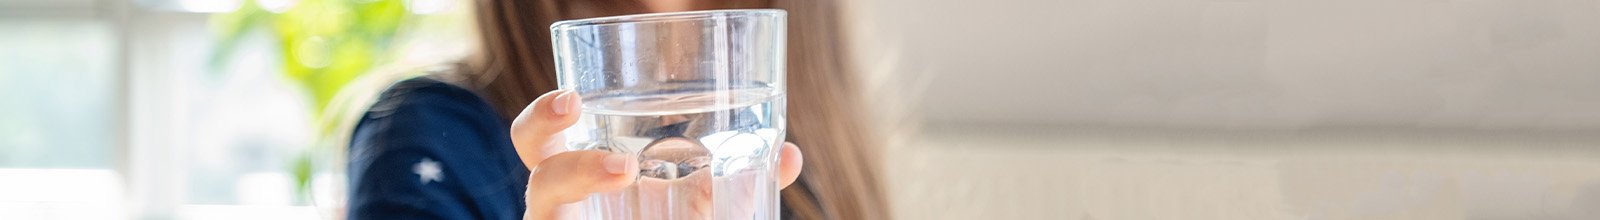 Close up photo of young girl holding a glass of drinking water